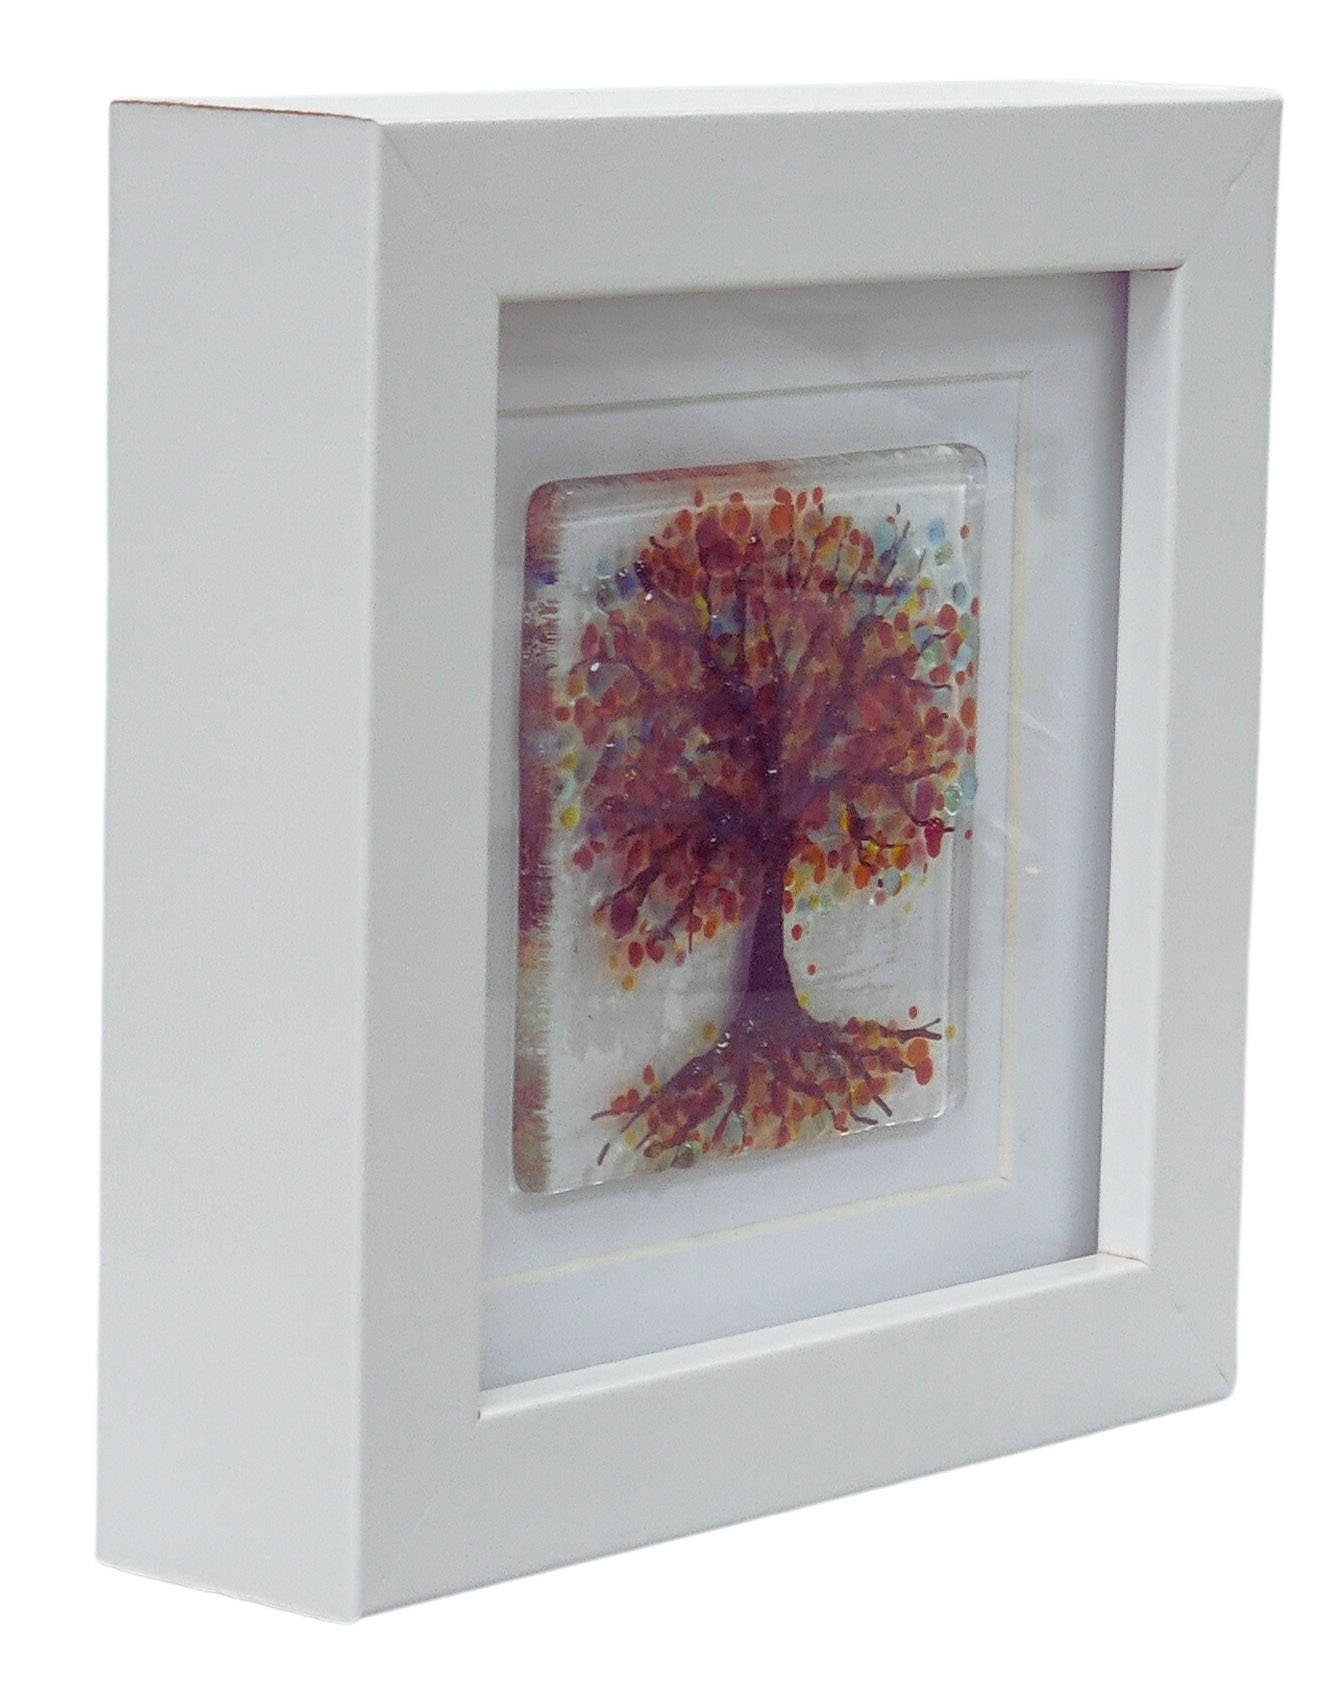 Fused glass small framed picture, mini fused glass art, rainbow tree, fused glass trees picture